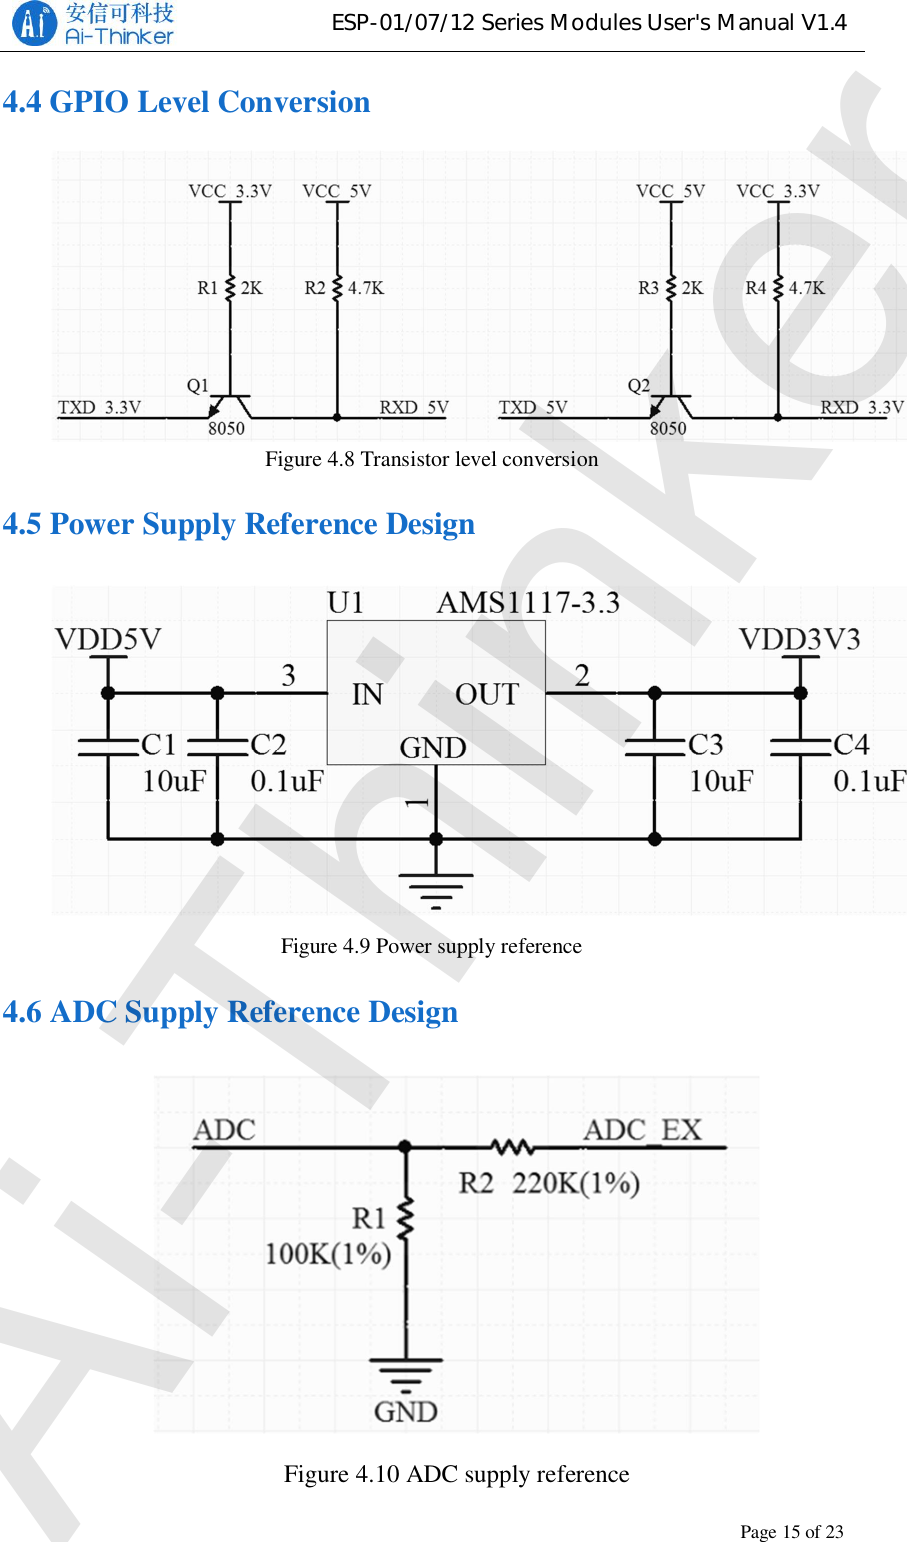 ESP-01/07/12 Series Modules User&apos;s Manual V1.4Copyright © 2017 Shenzhen Ai-Thinker Technology Co., Ltd All Rights ReservedPage15of234.4 GPIO Level ConversionFigure 4.8 Transistor level conversion4.5 Power Supply Reference DesignFigure 4.9 Power supply reference4.6 ADC Supply Reference DesignFigure 4.10 ADC supply referenceAi-Thinker